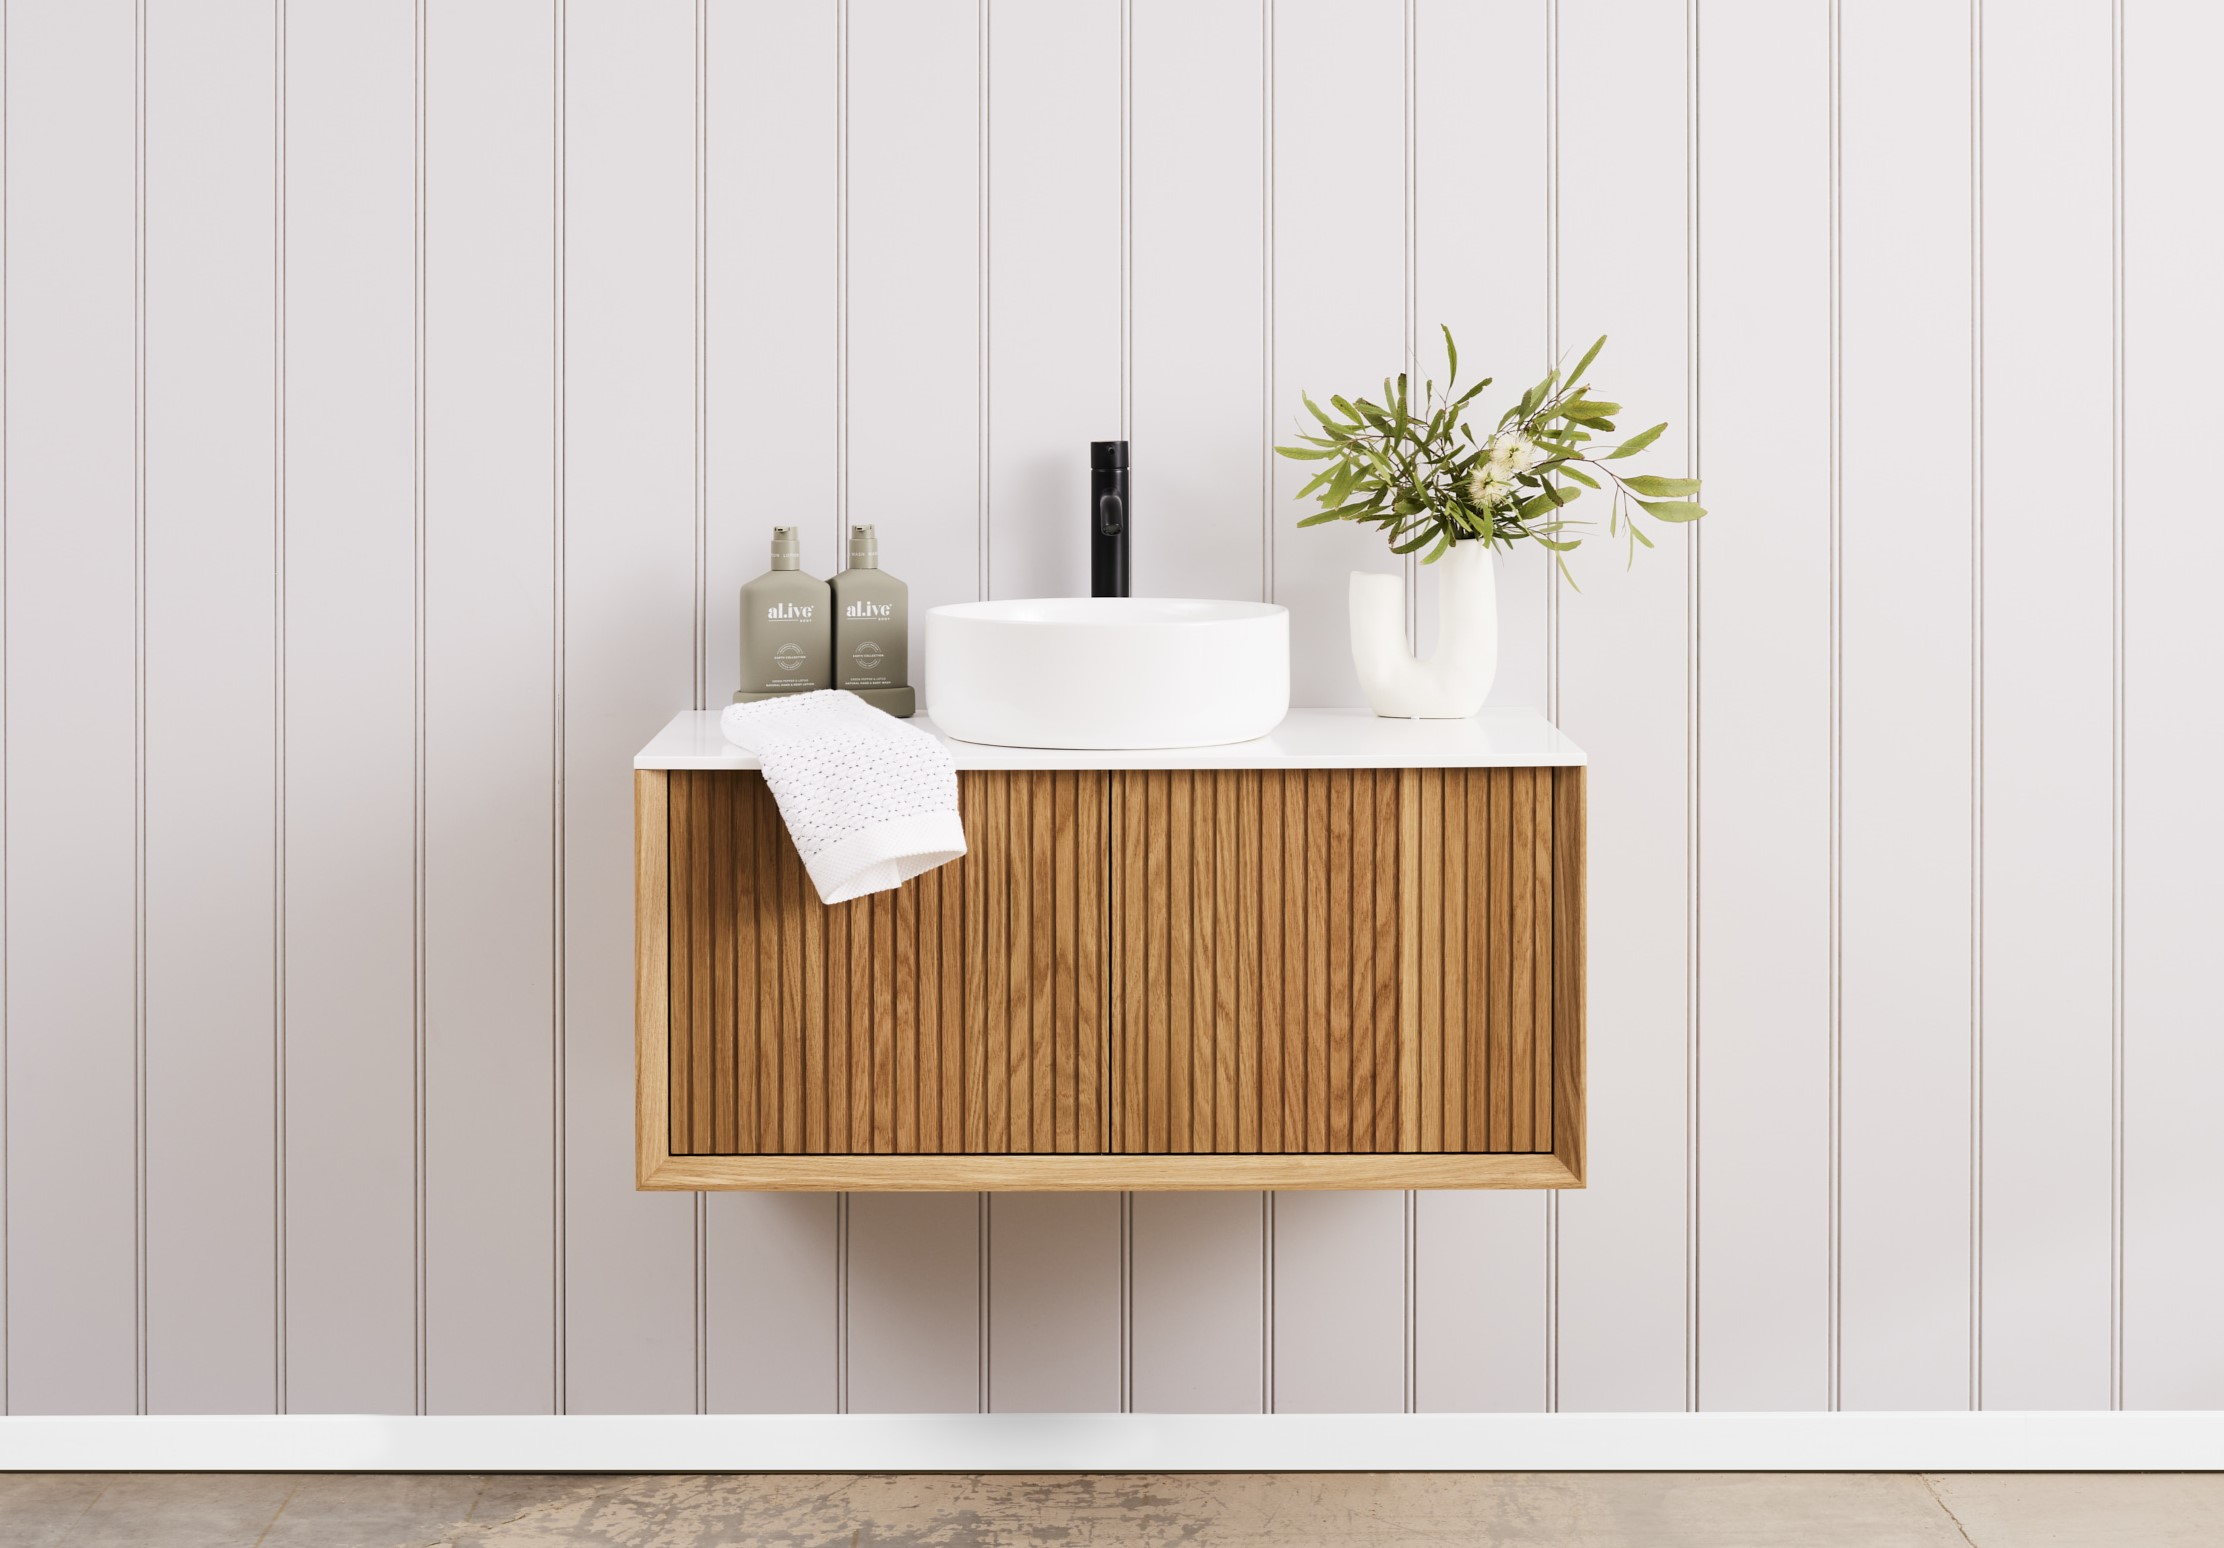 A wall hung vanity unit in a small bathroom, creating more space